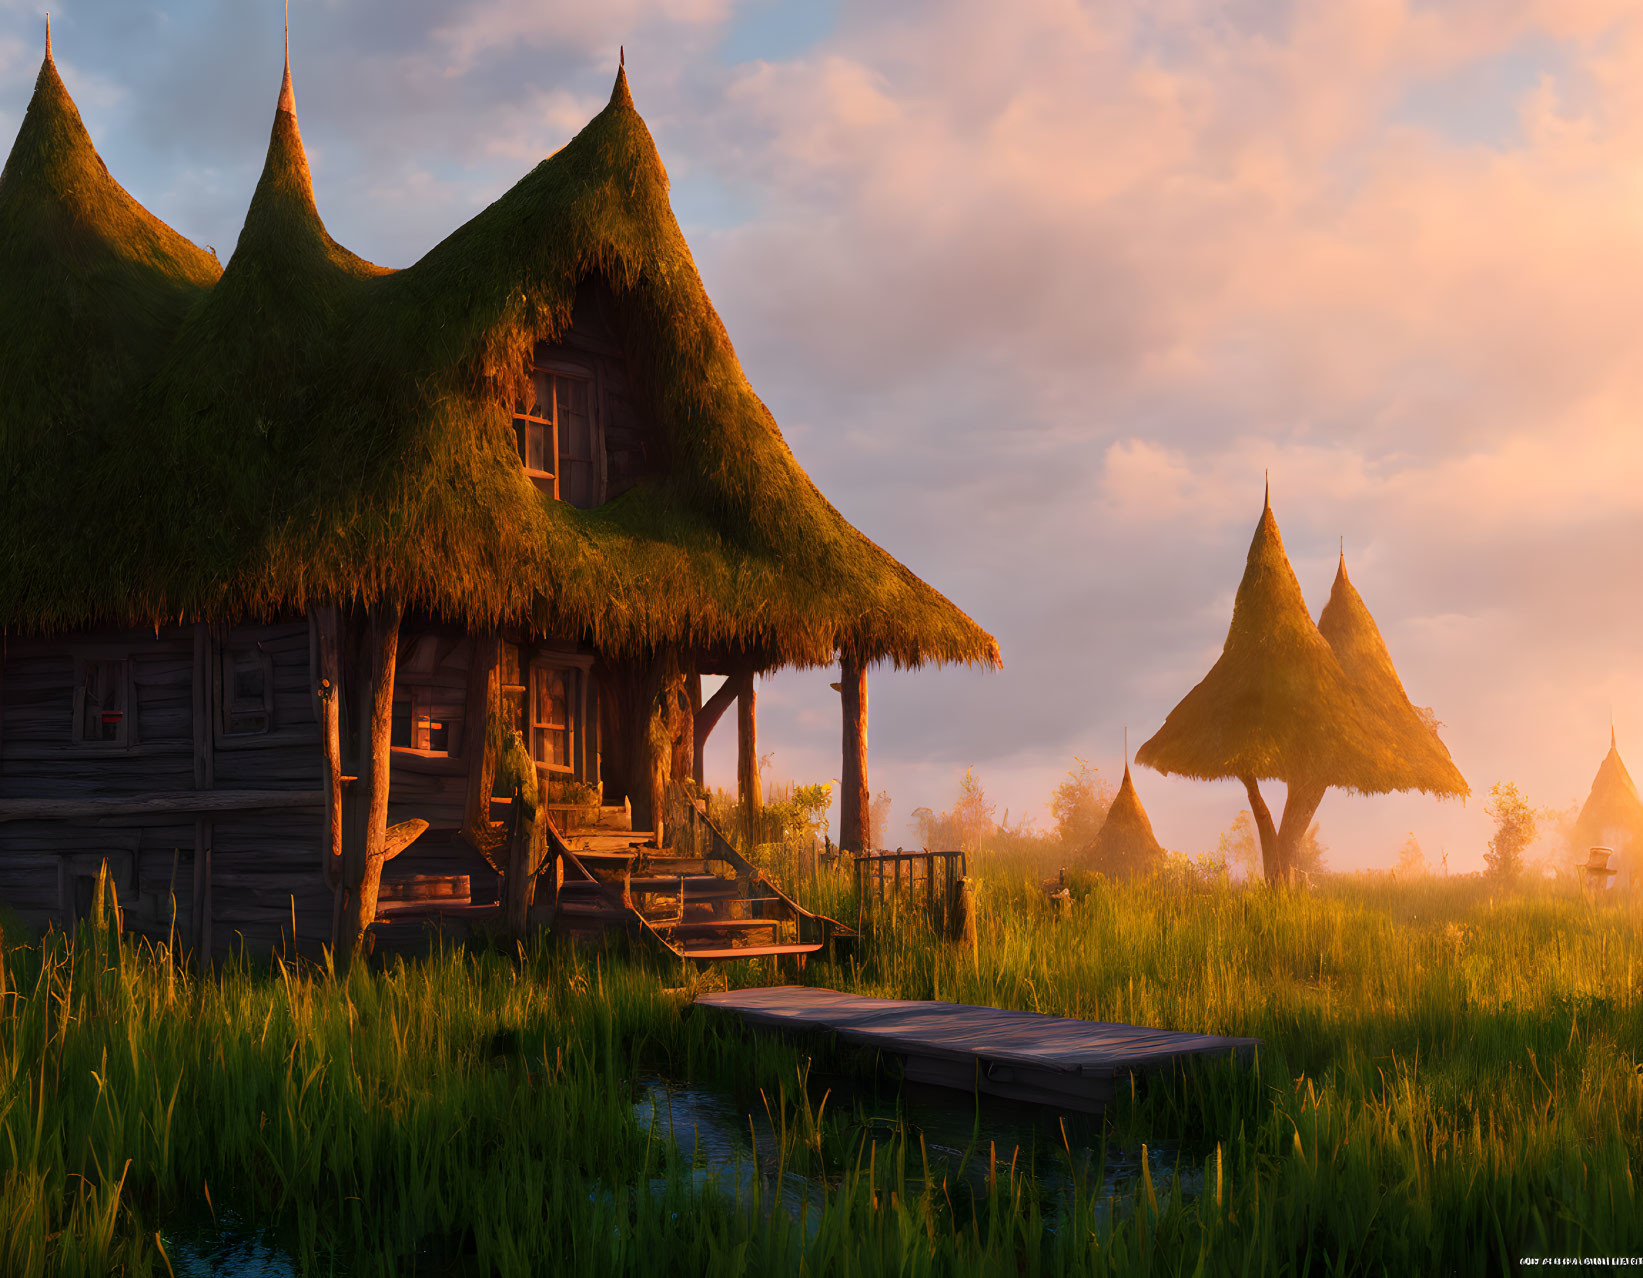 Rustic Thatched-Roof Cottage in Tall Grass at Sunset